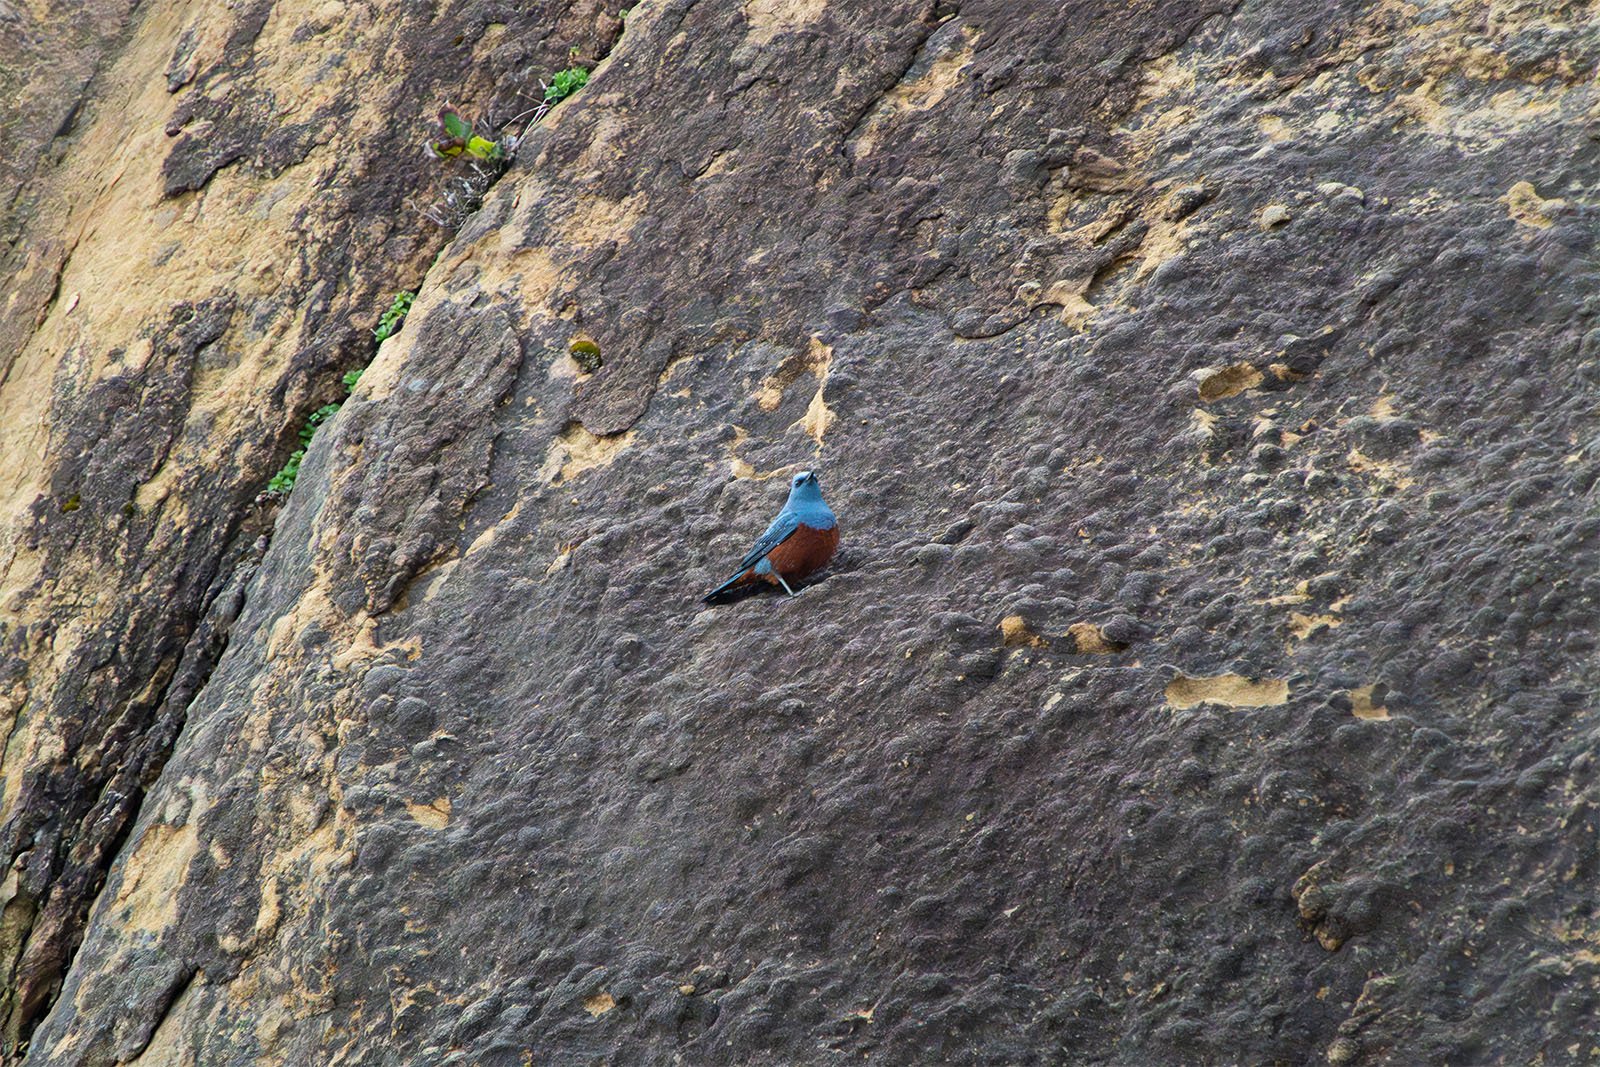 A blue bird with a rusty-red breast perched on a rugged, textured rock surface, with small plants sprouting in the background.